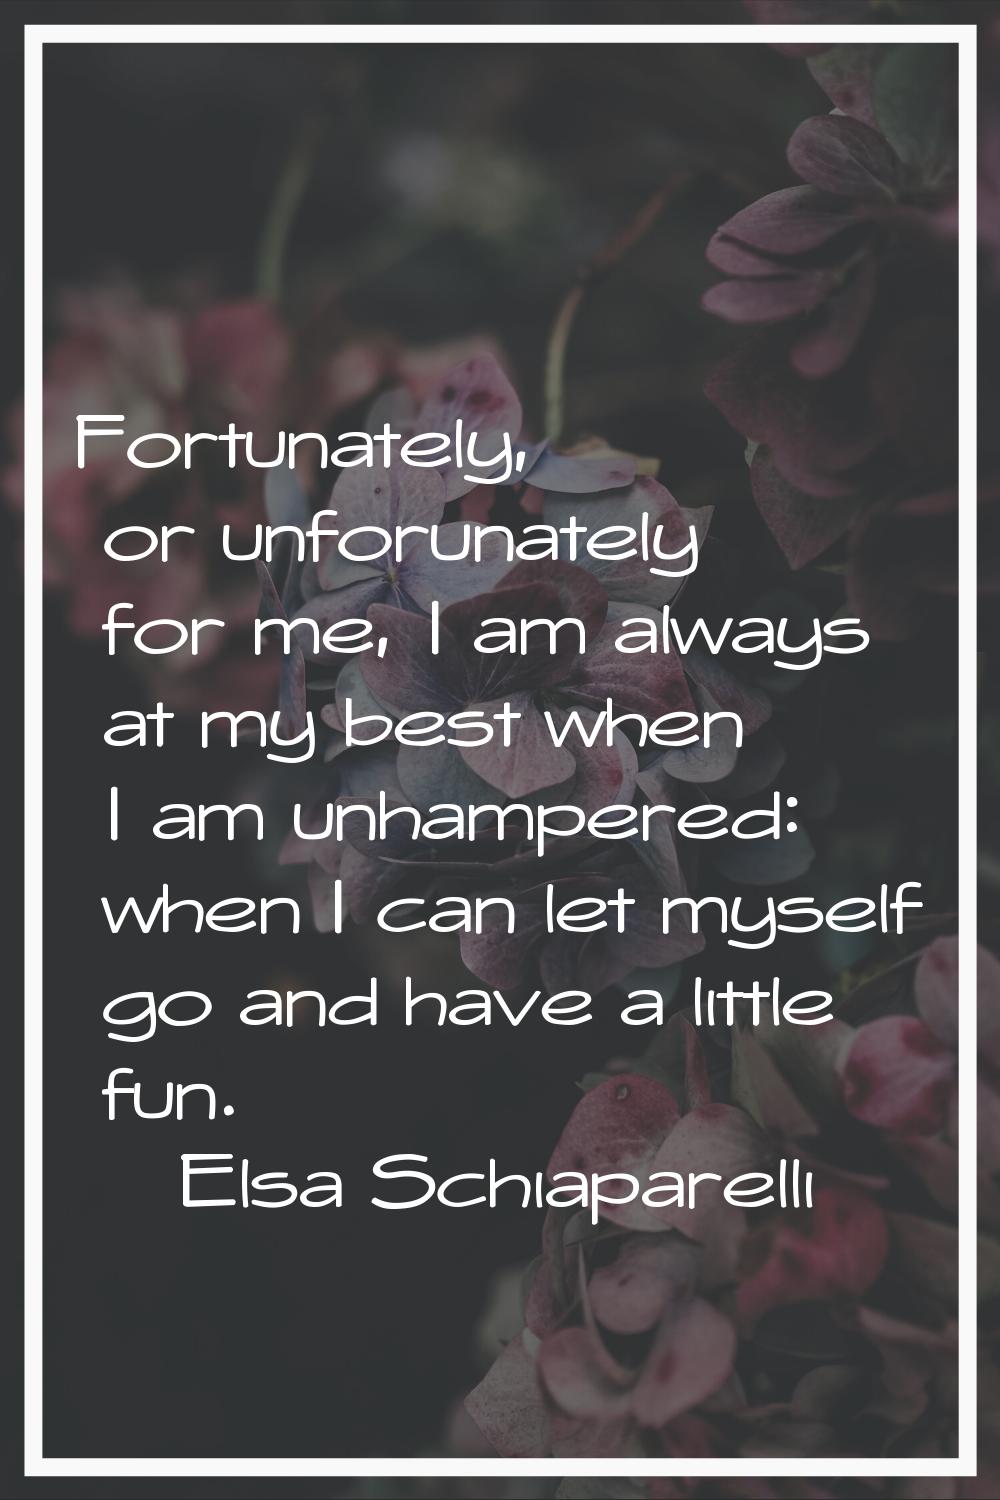 Fortunately, or unforunately for me, I am always at my best when I am unhampered: when I can let my